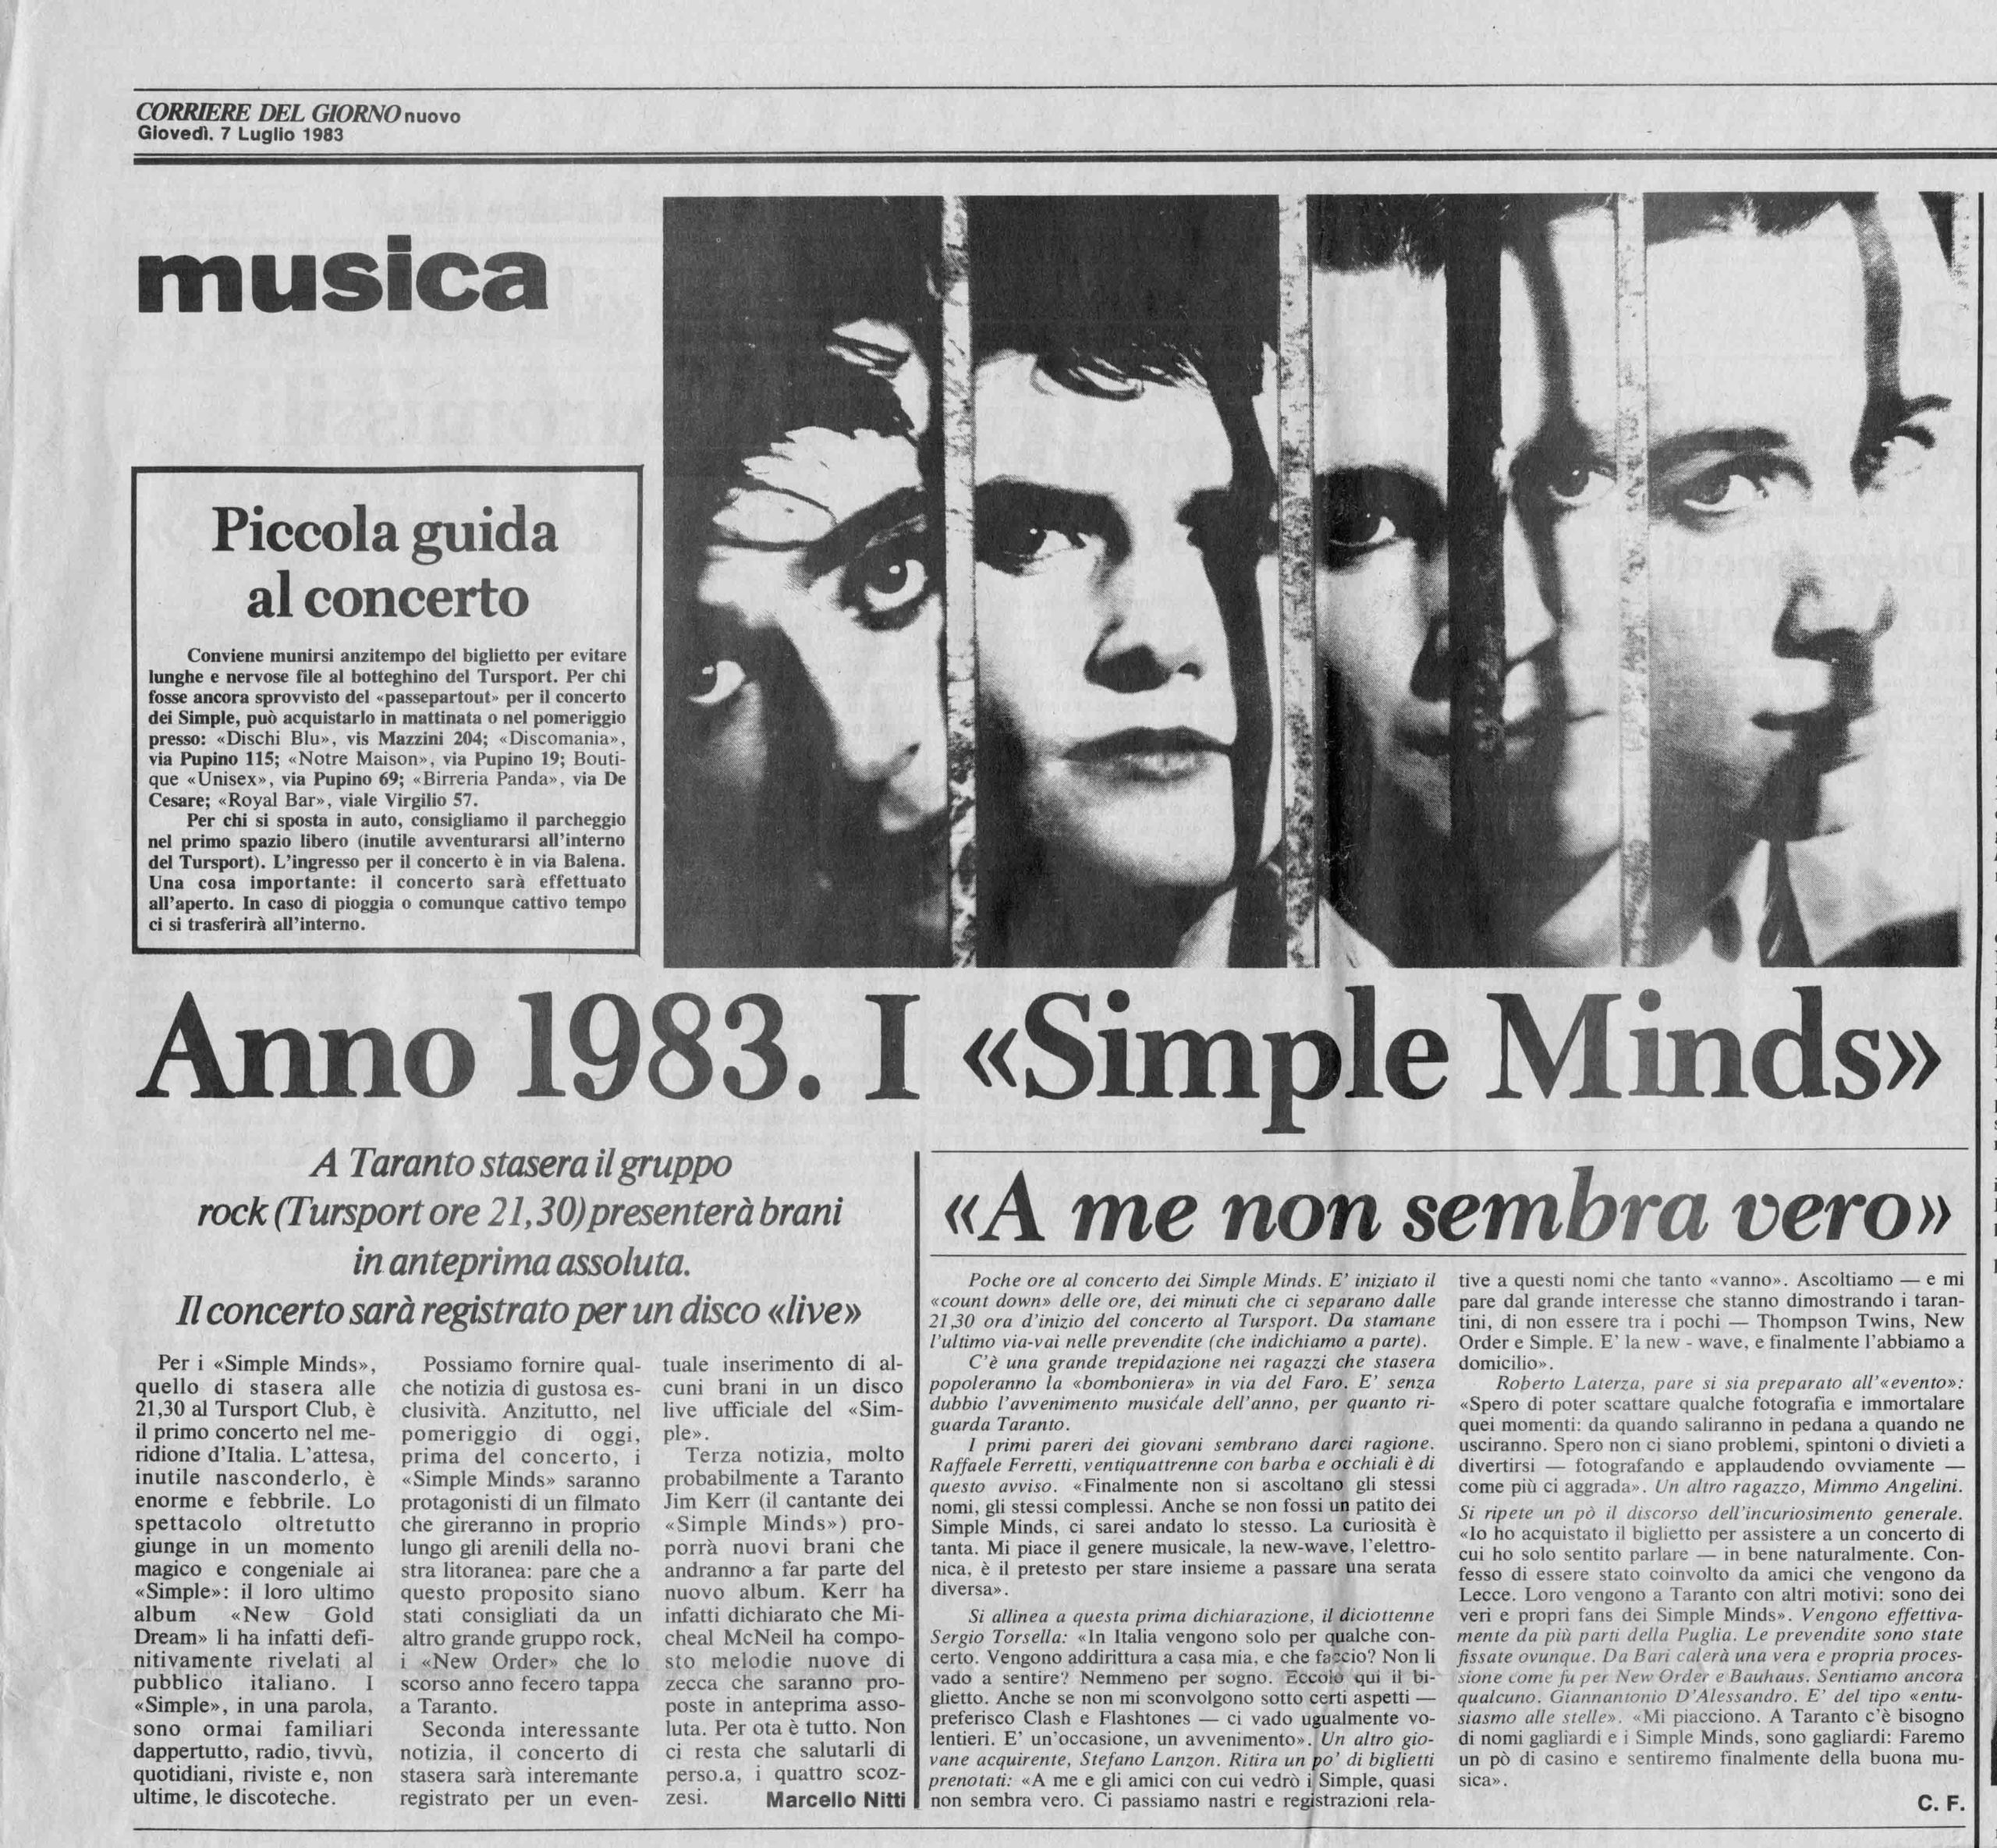 07.07.1983.  Anno 1983: i Simple Minds.